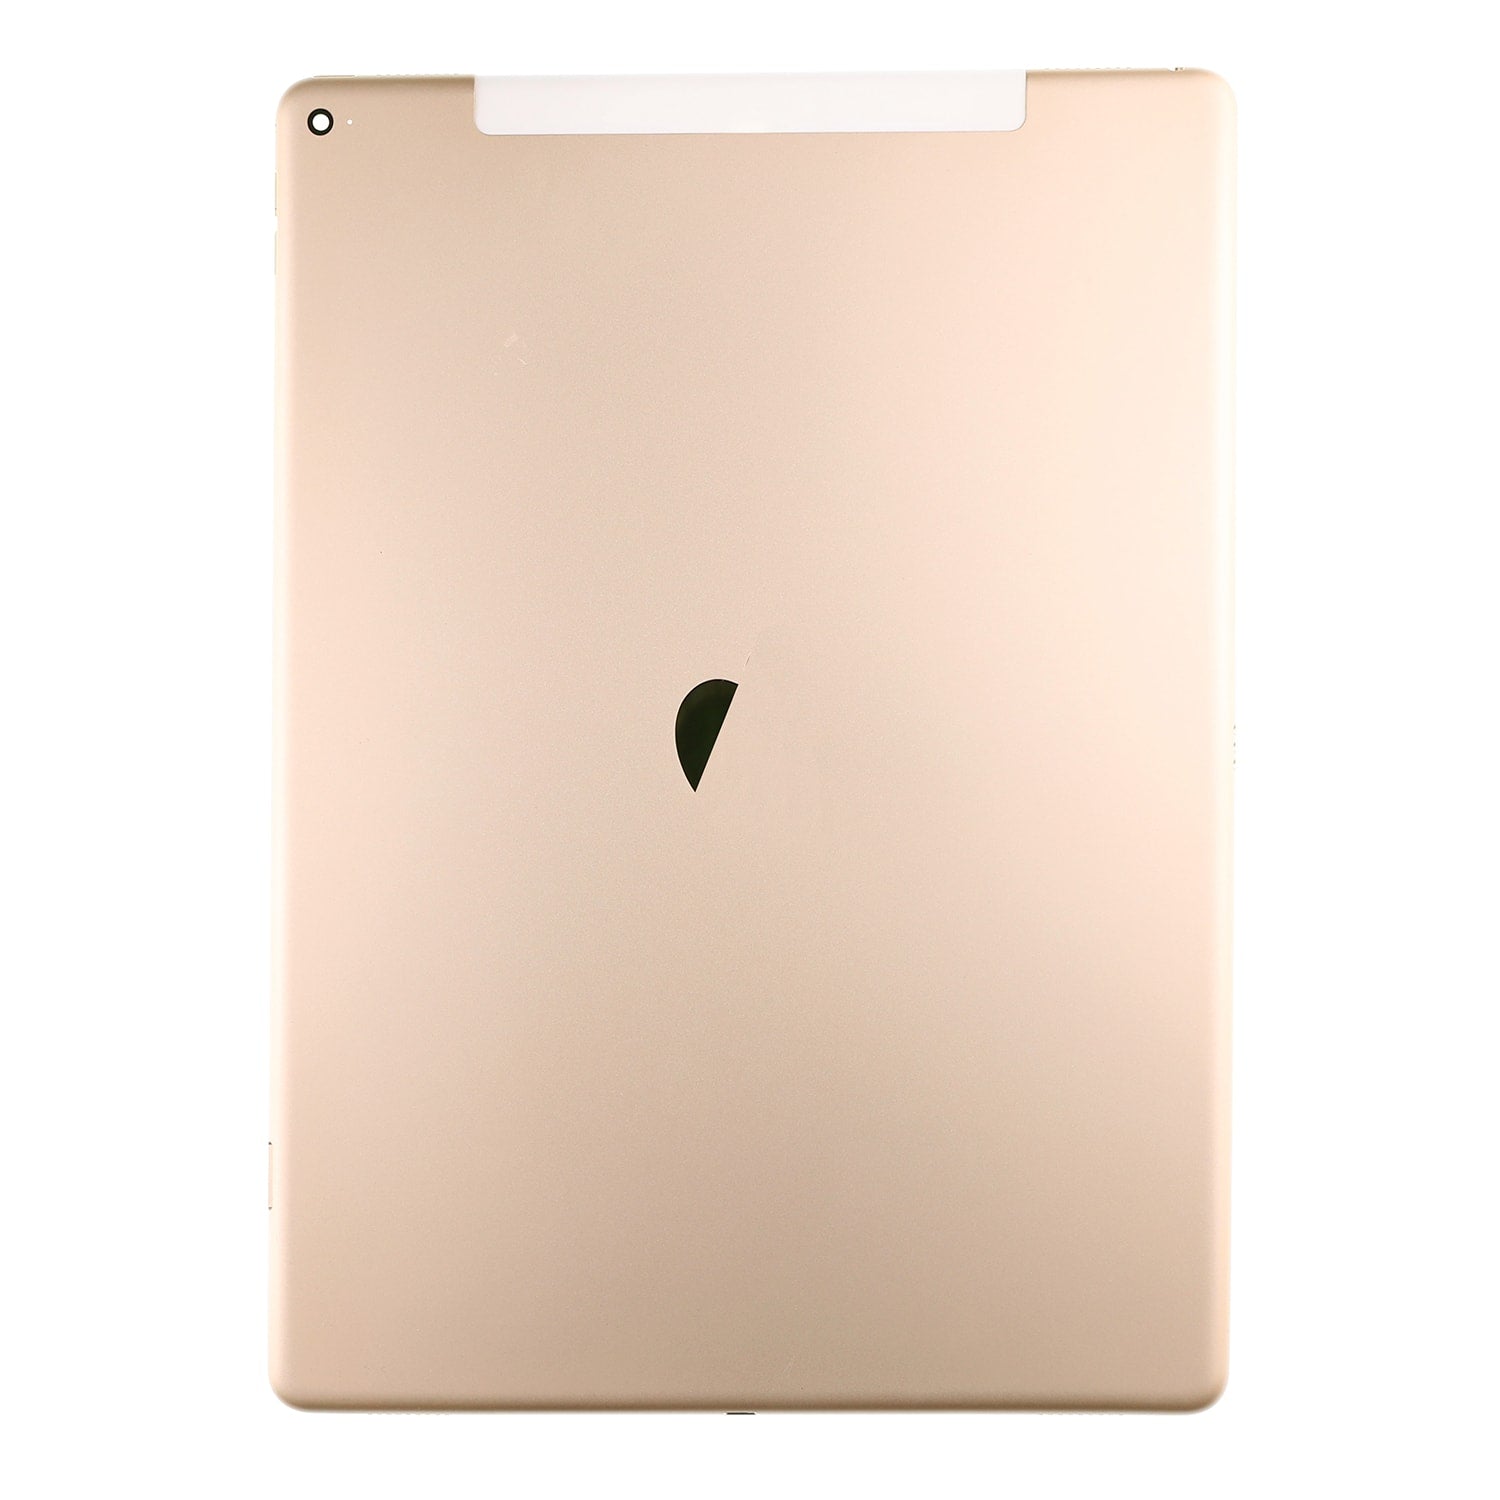 BACK COVER WIFI + CELLULAR VERSION FOR IPAD PRO 12.9" 1ST GEN- GOLD